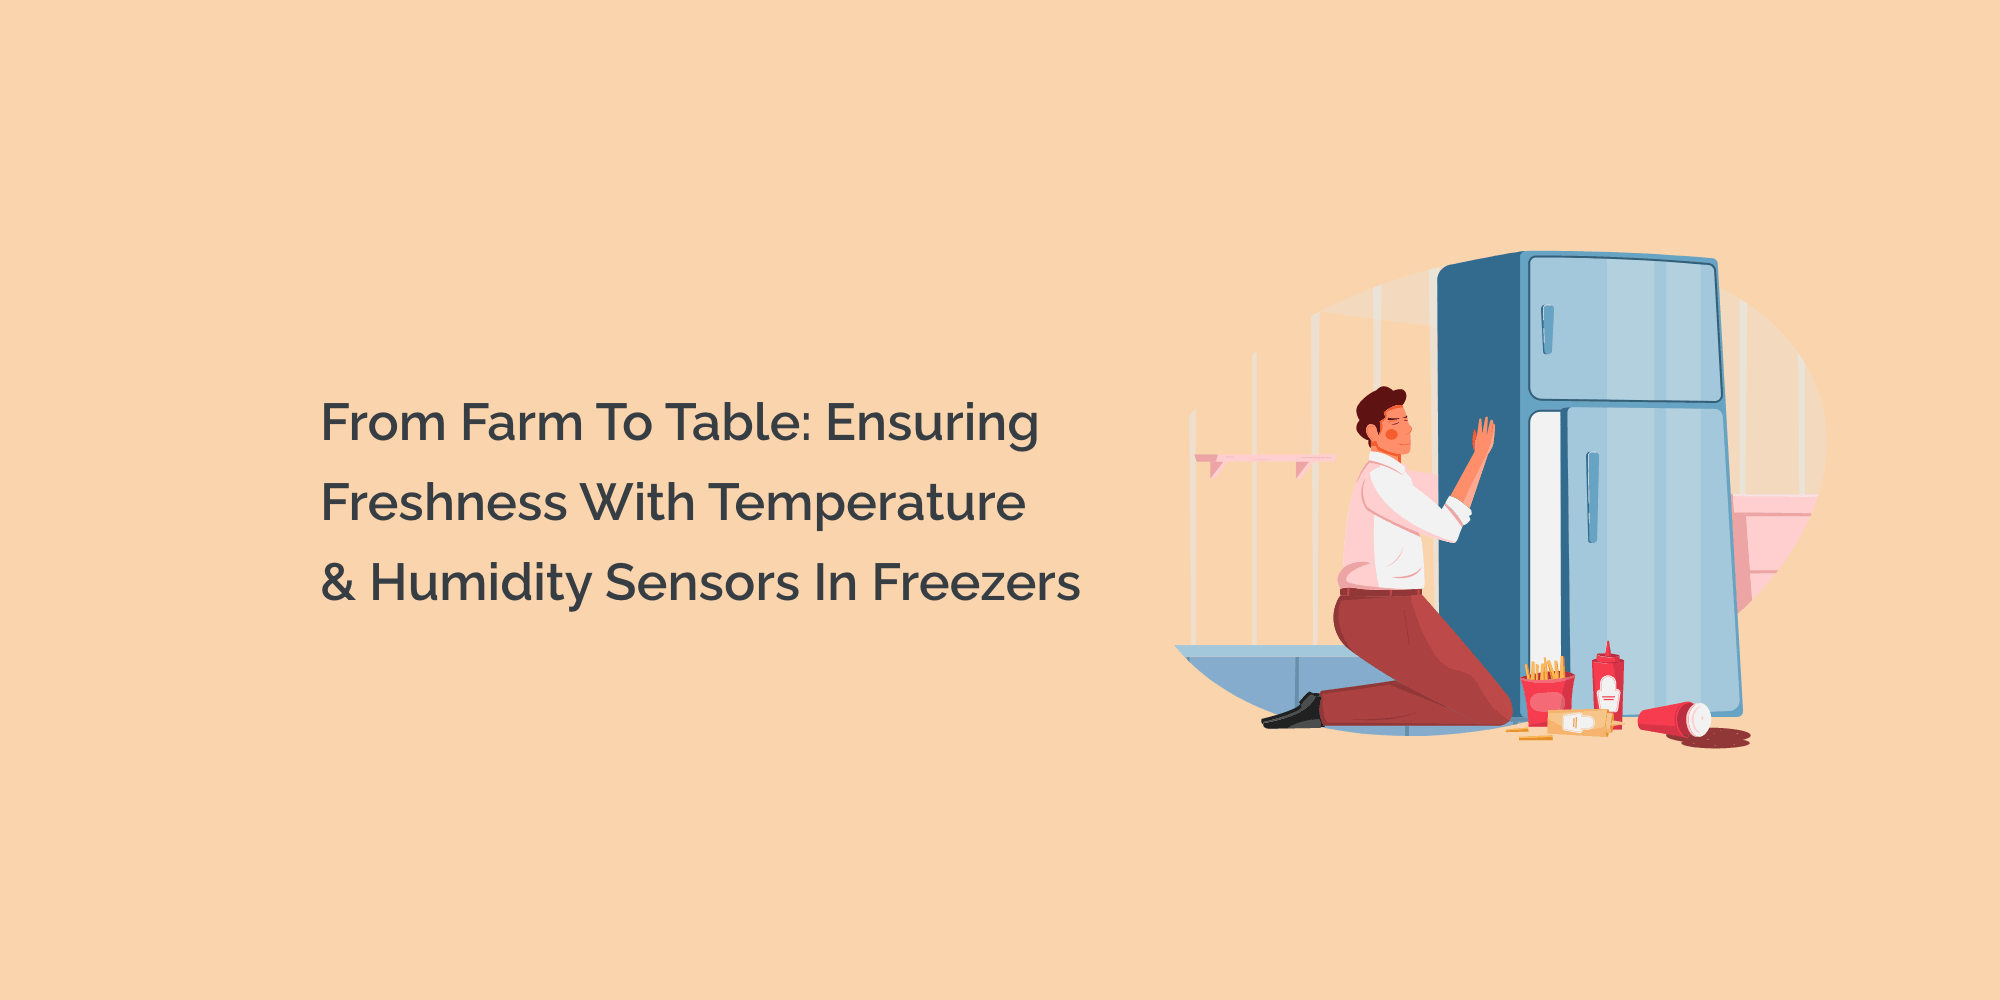 From Farm to Table: Ensuring Freshness with Temperature and Humidity Sensors in Freezers